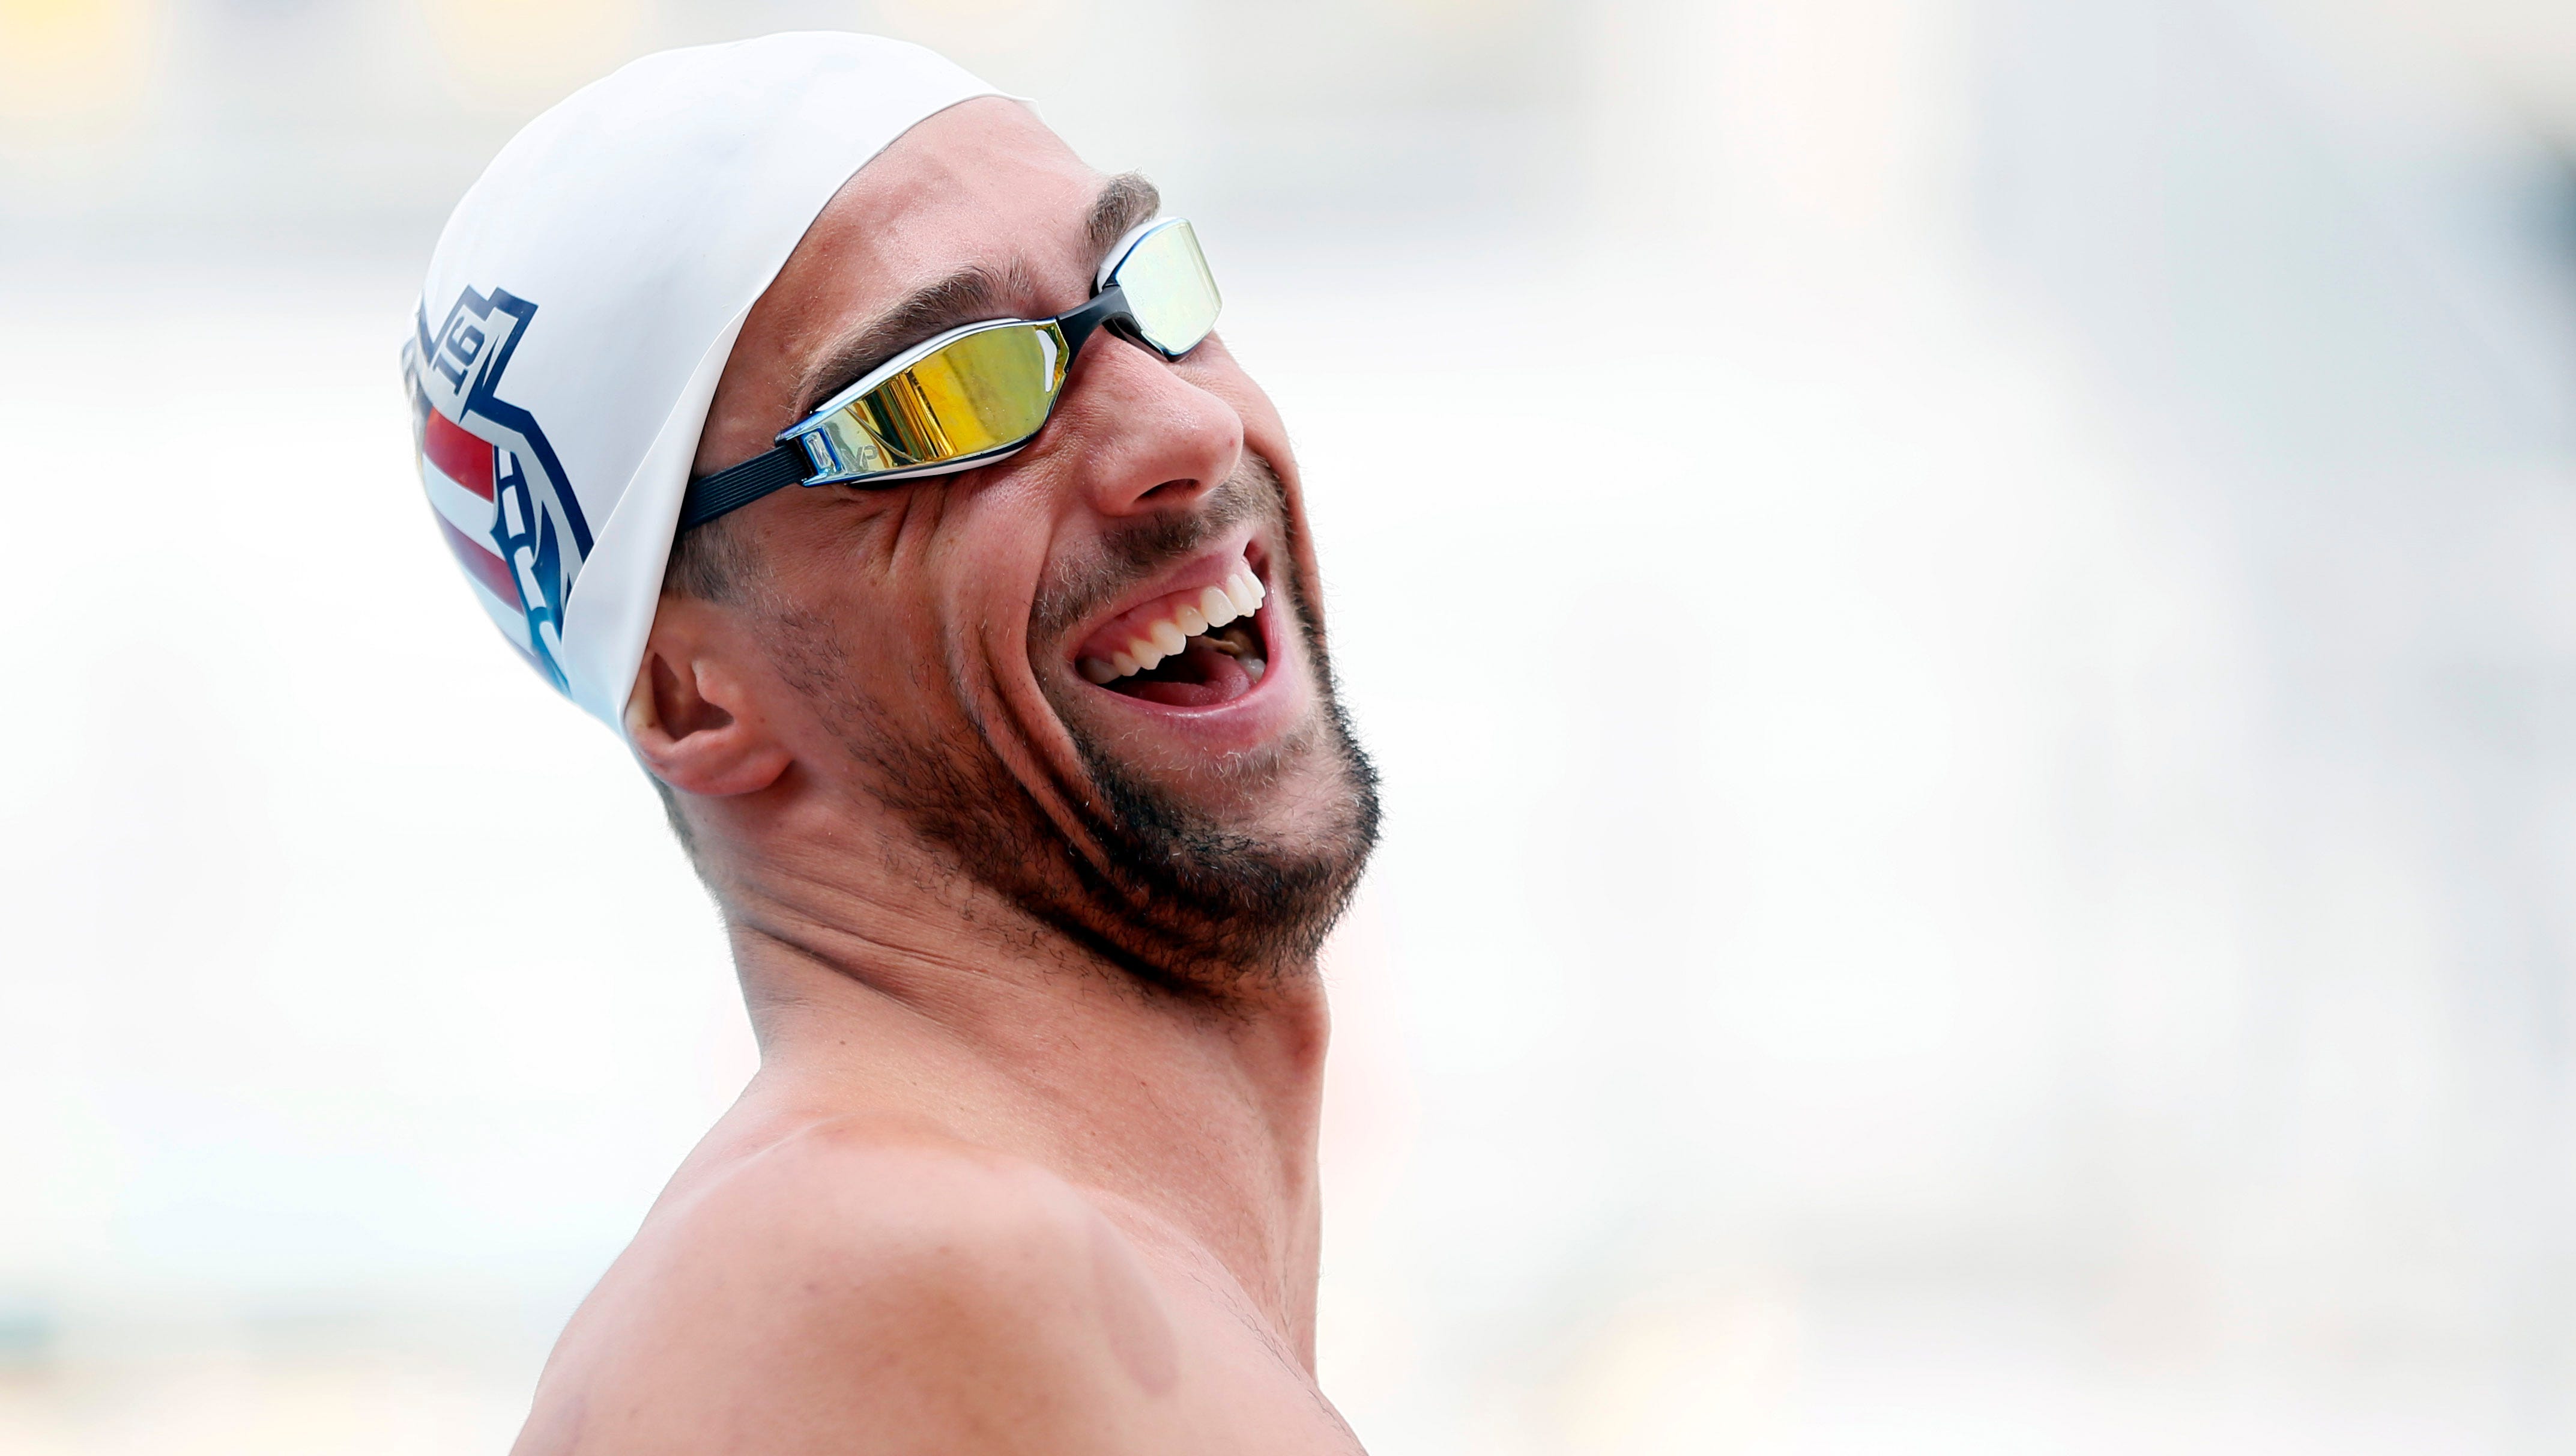 Michael Phelps says he feels like a 'different person now'